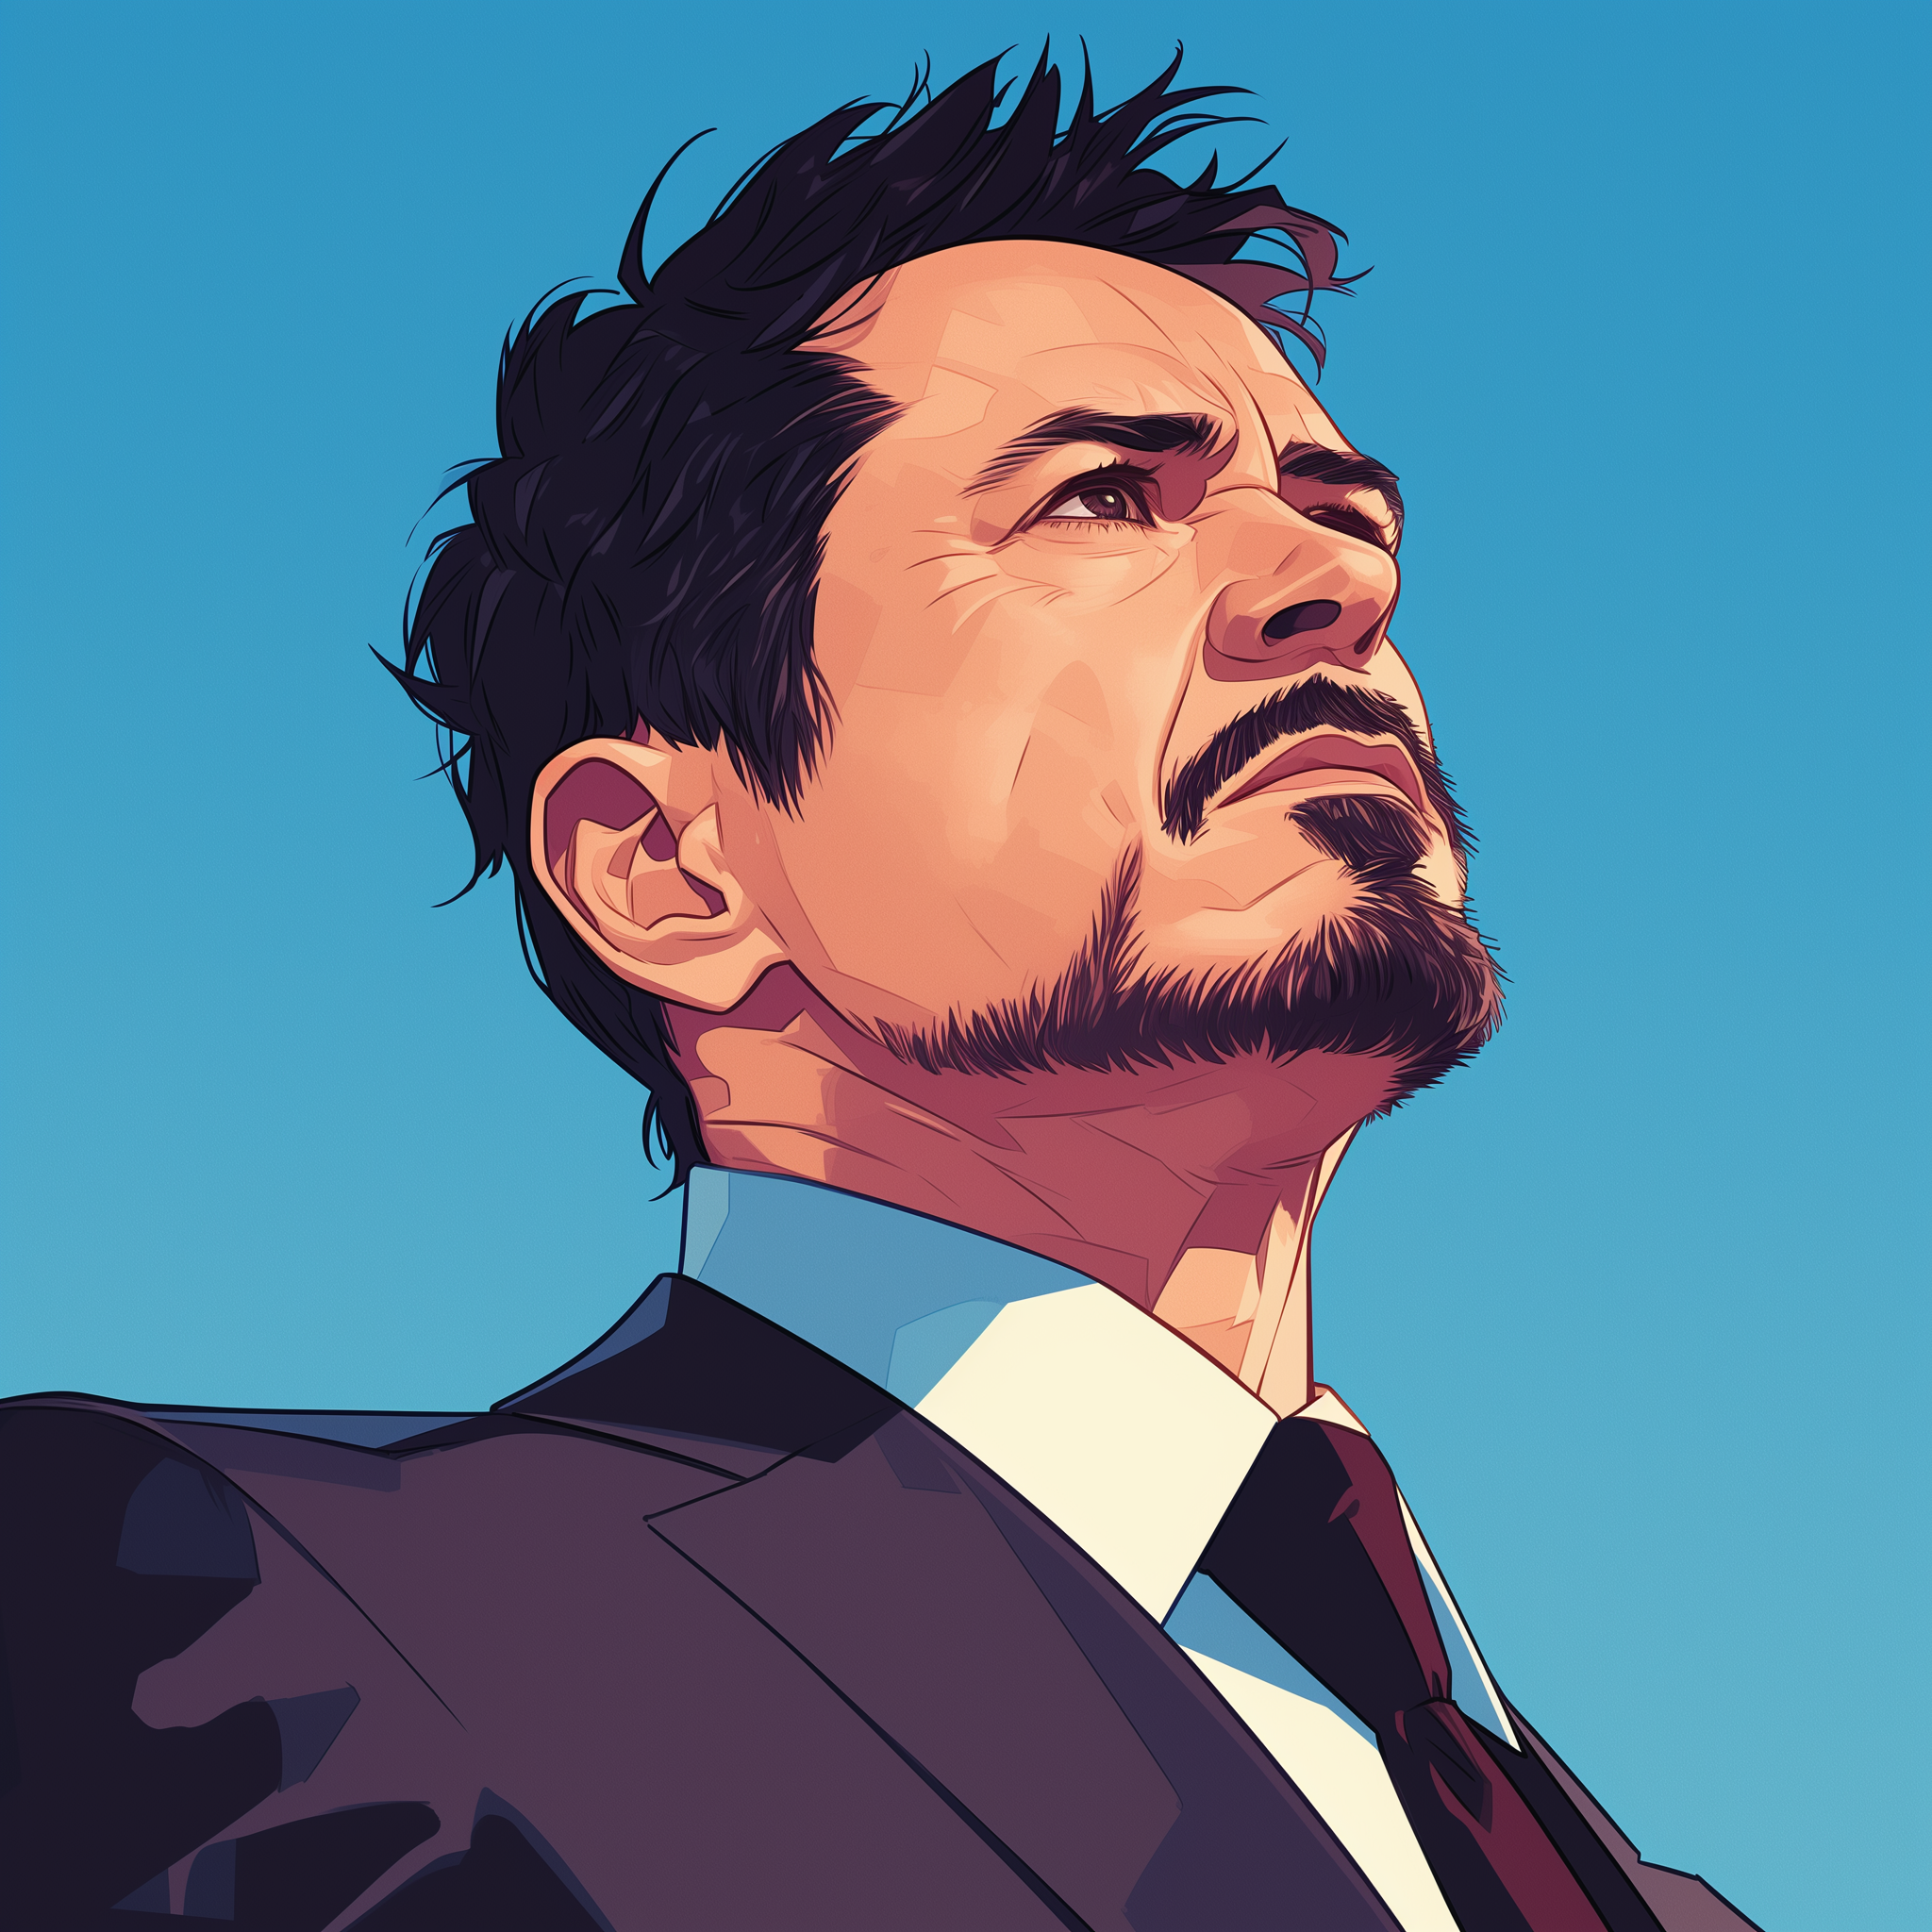 Stylized avatar illustration of a popular Marvel Comics character looking thoughtful against a blue sky background.